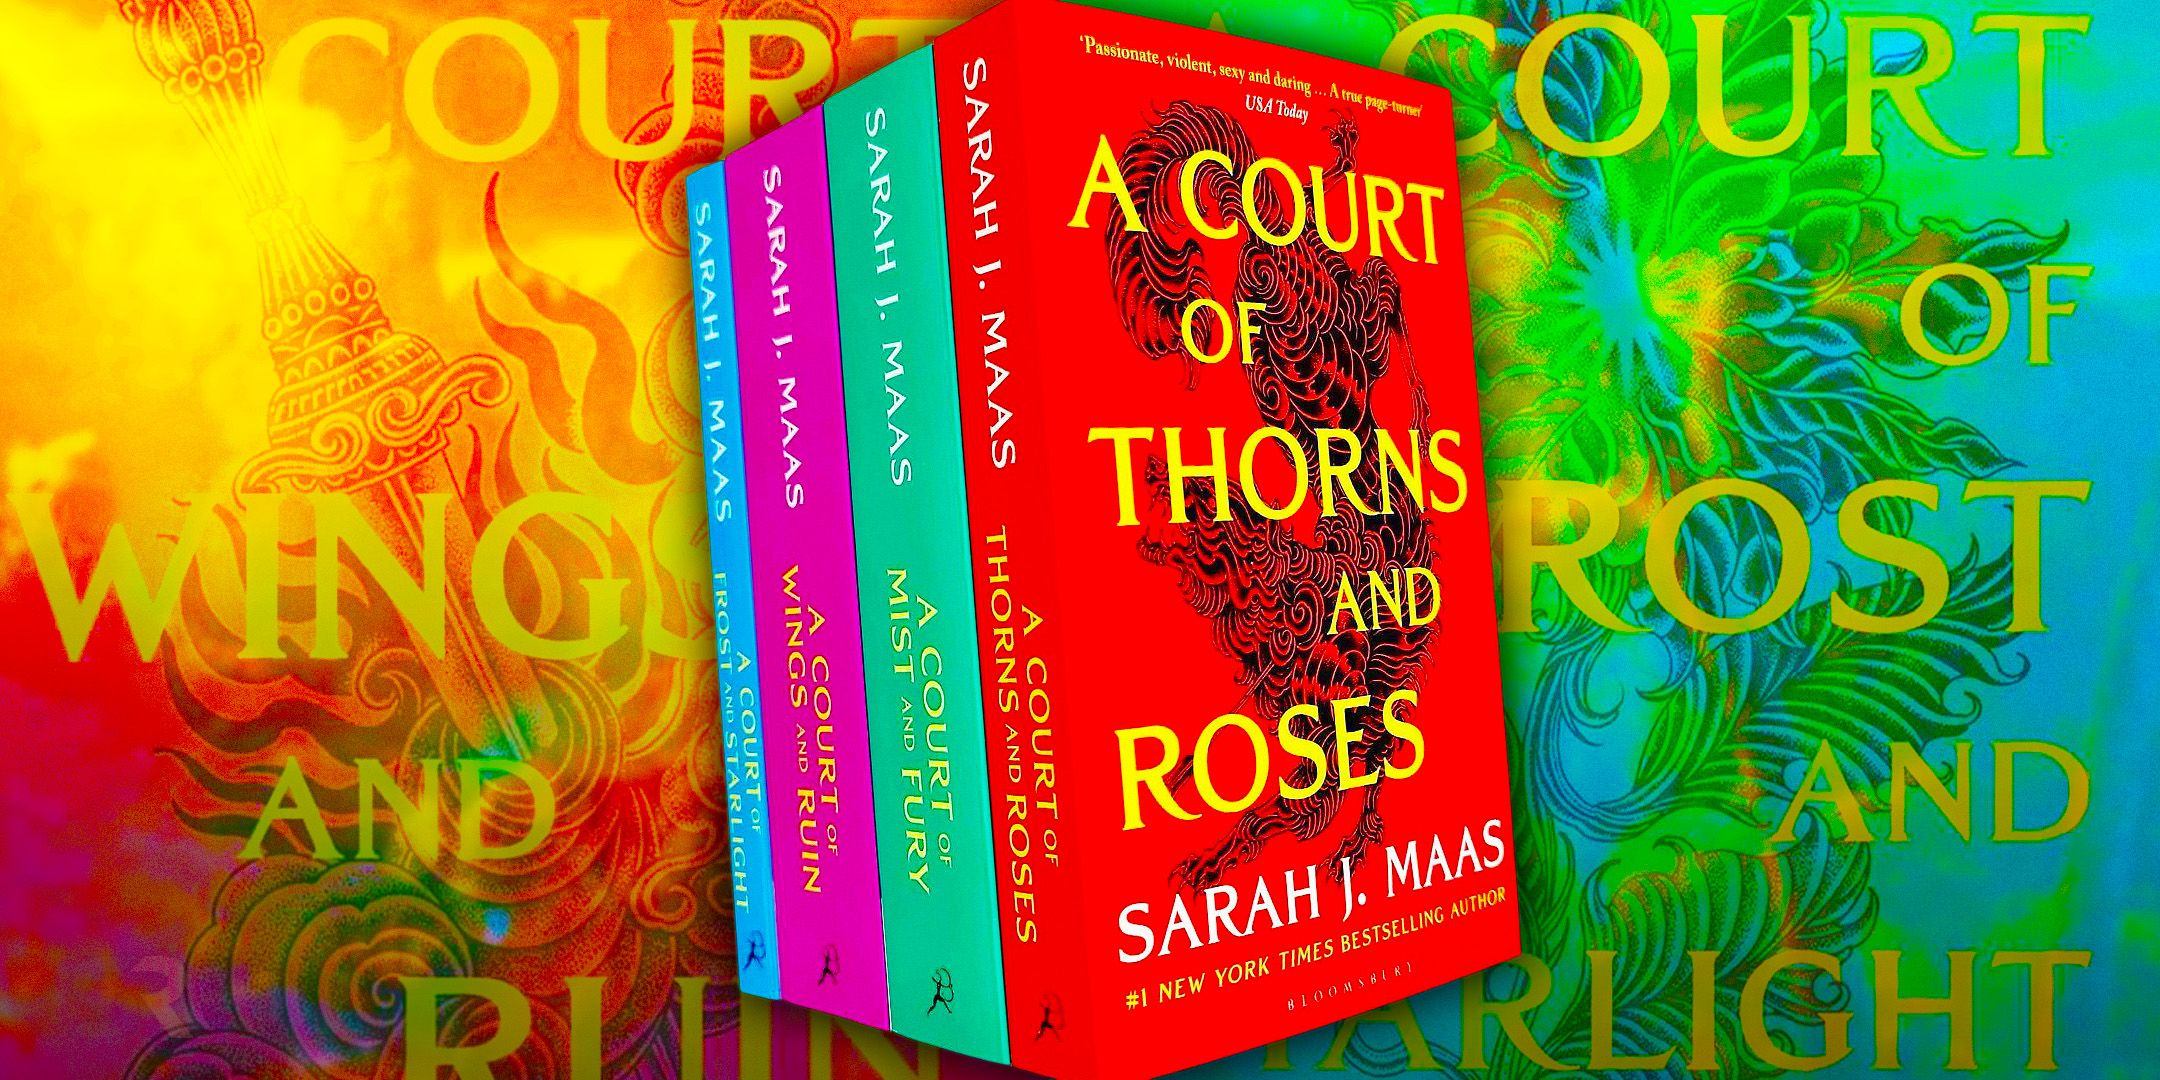 A stack of Sarah J. Maas' A Court of Thorns & Roses books against a colorful background